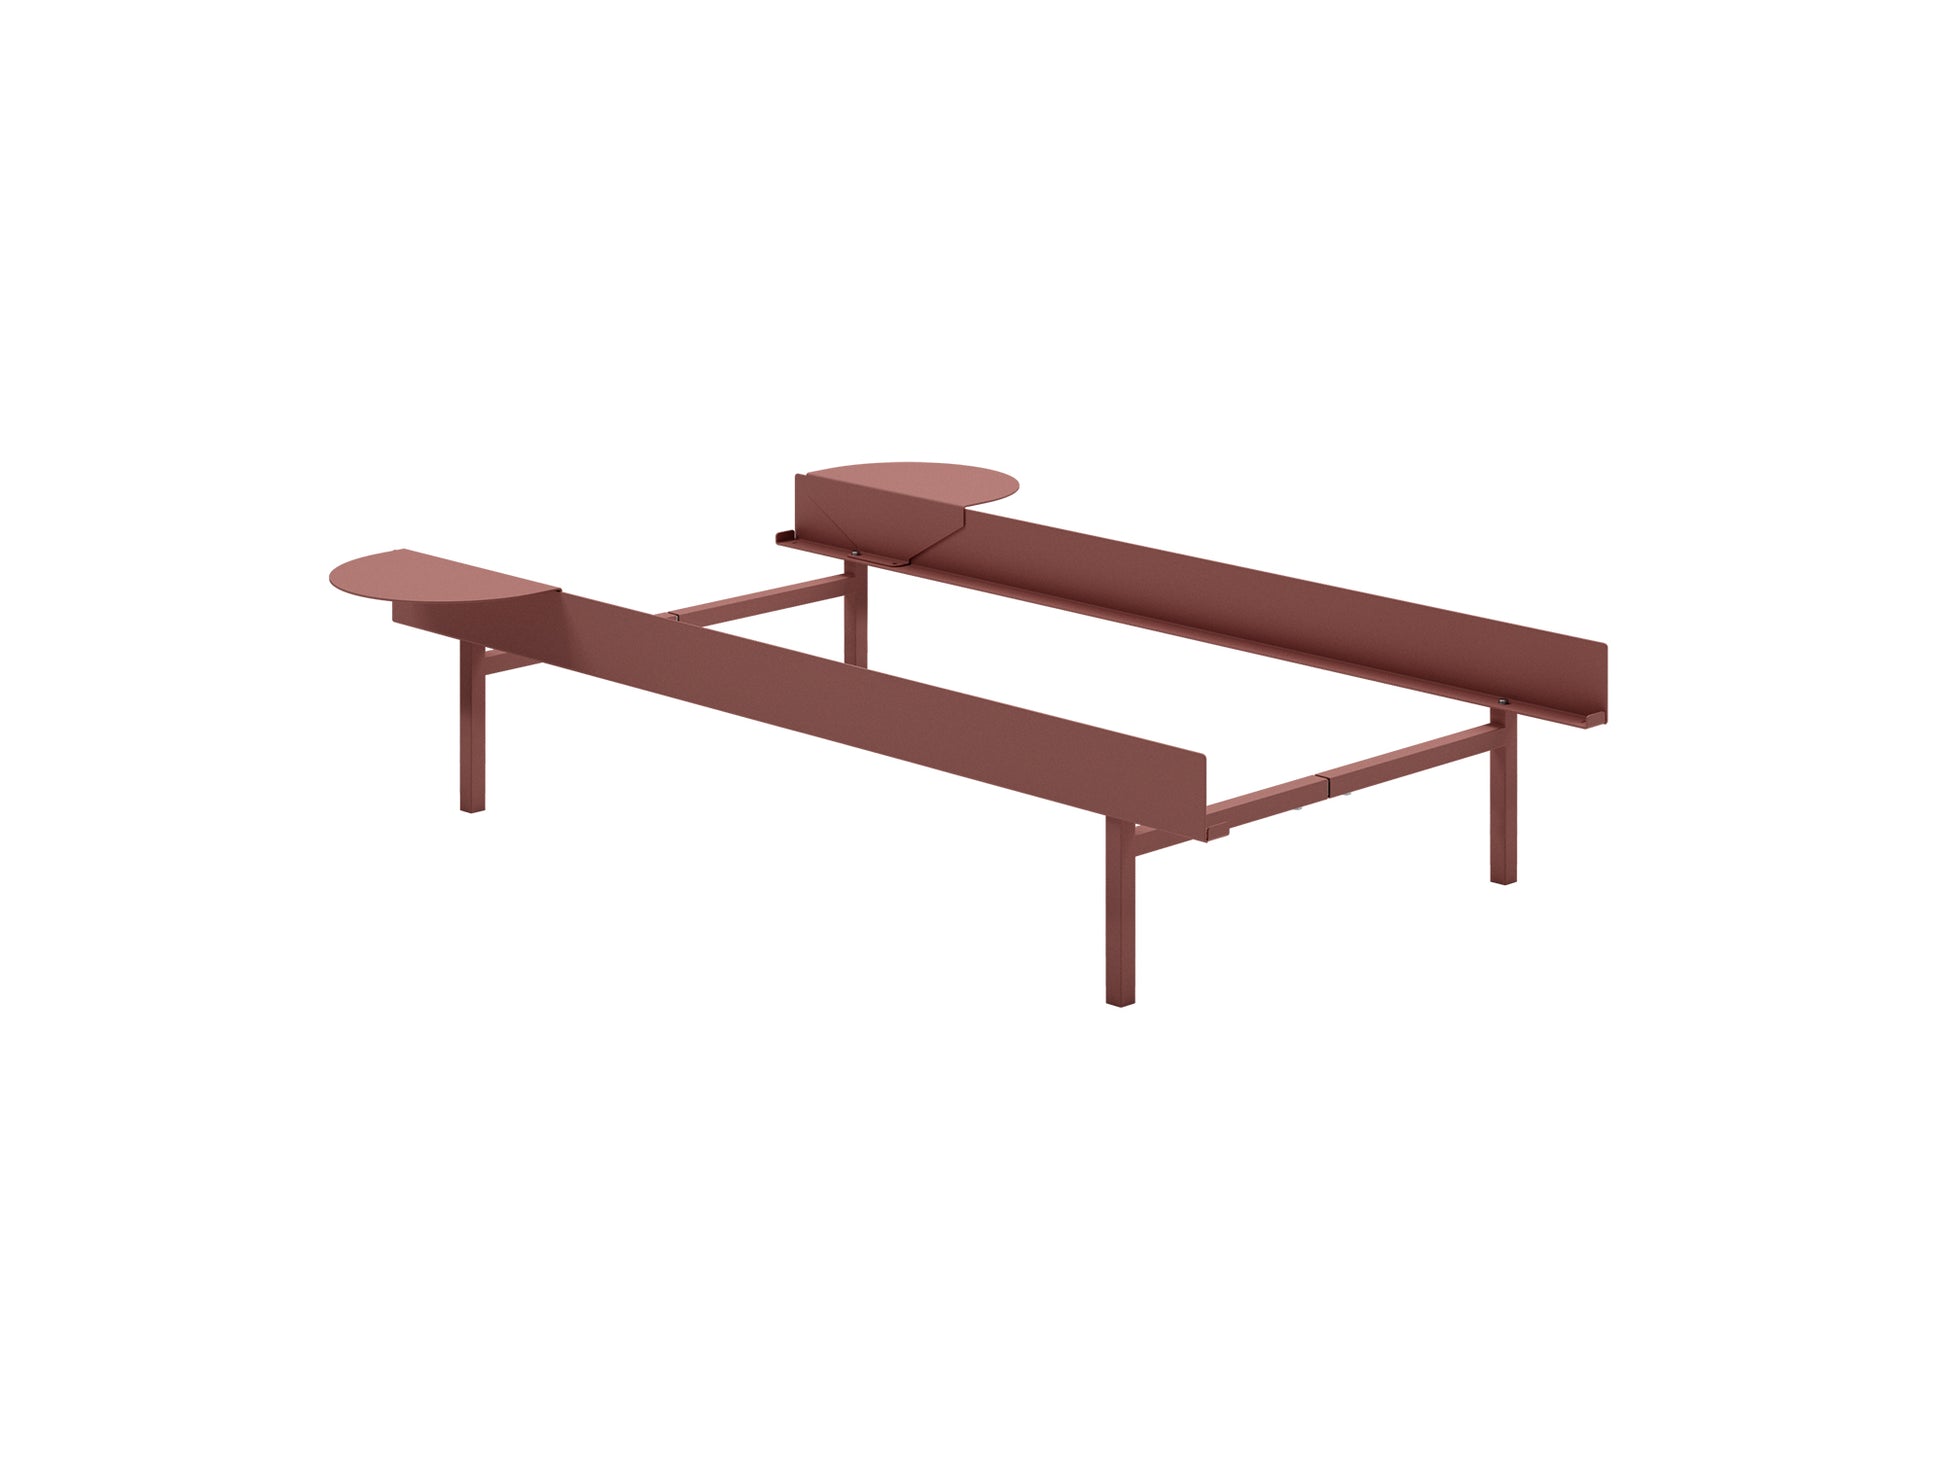 Bed 90 - 180 cm (High) by Moebe- Bed Frame / with NO SLATS / 2 Side Table / Dusty Rose